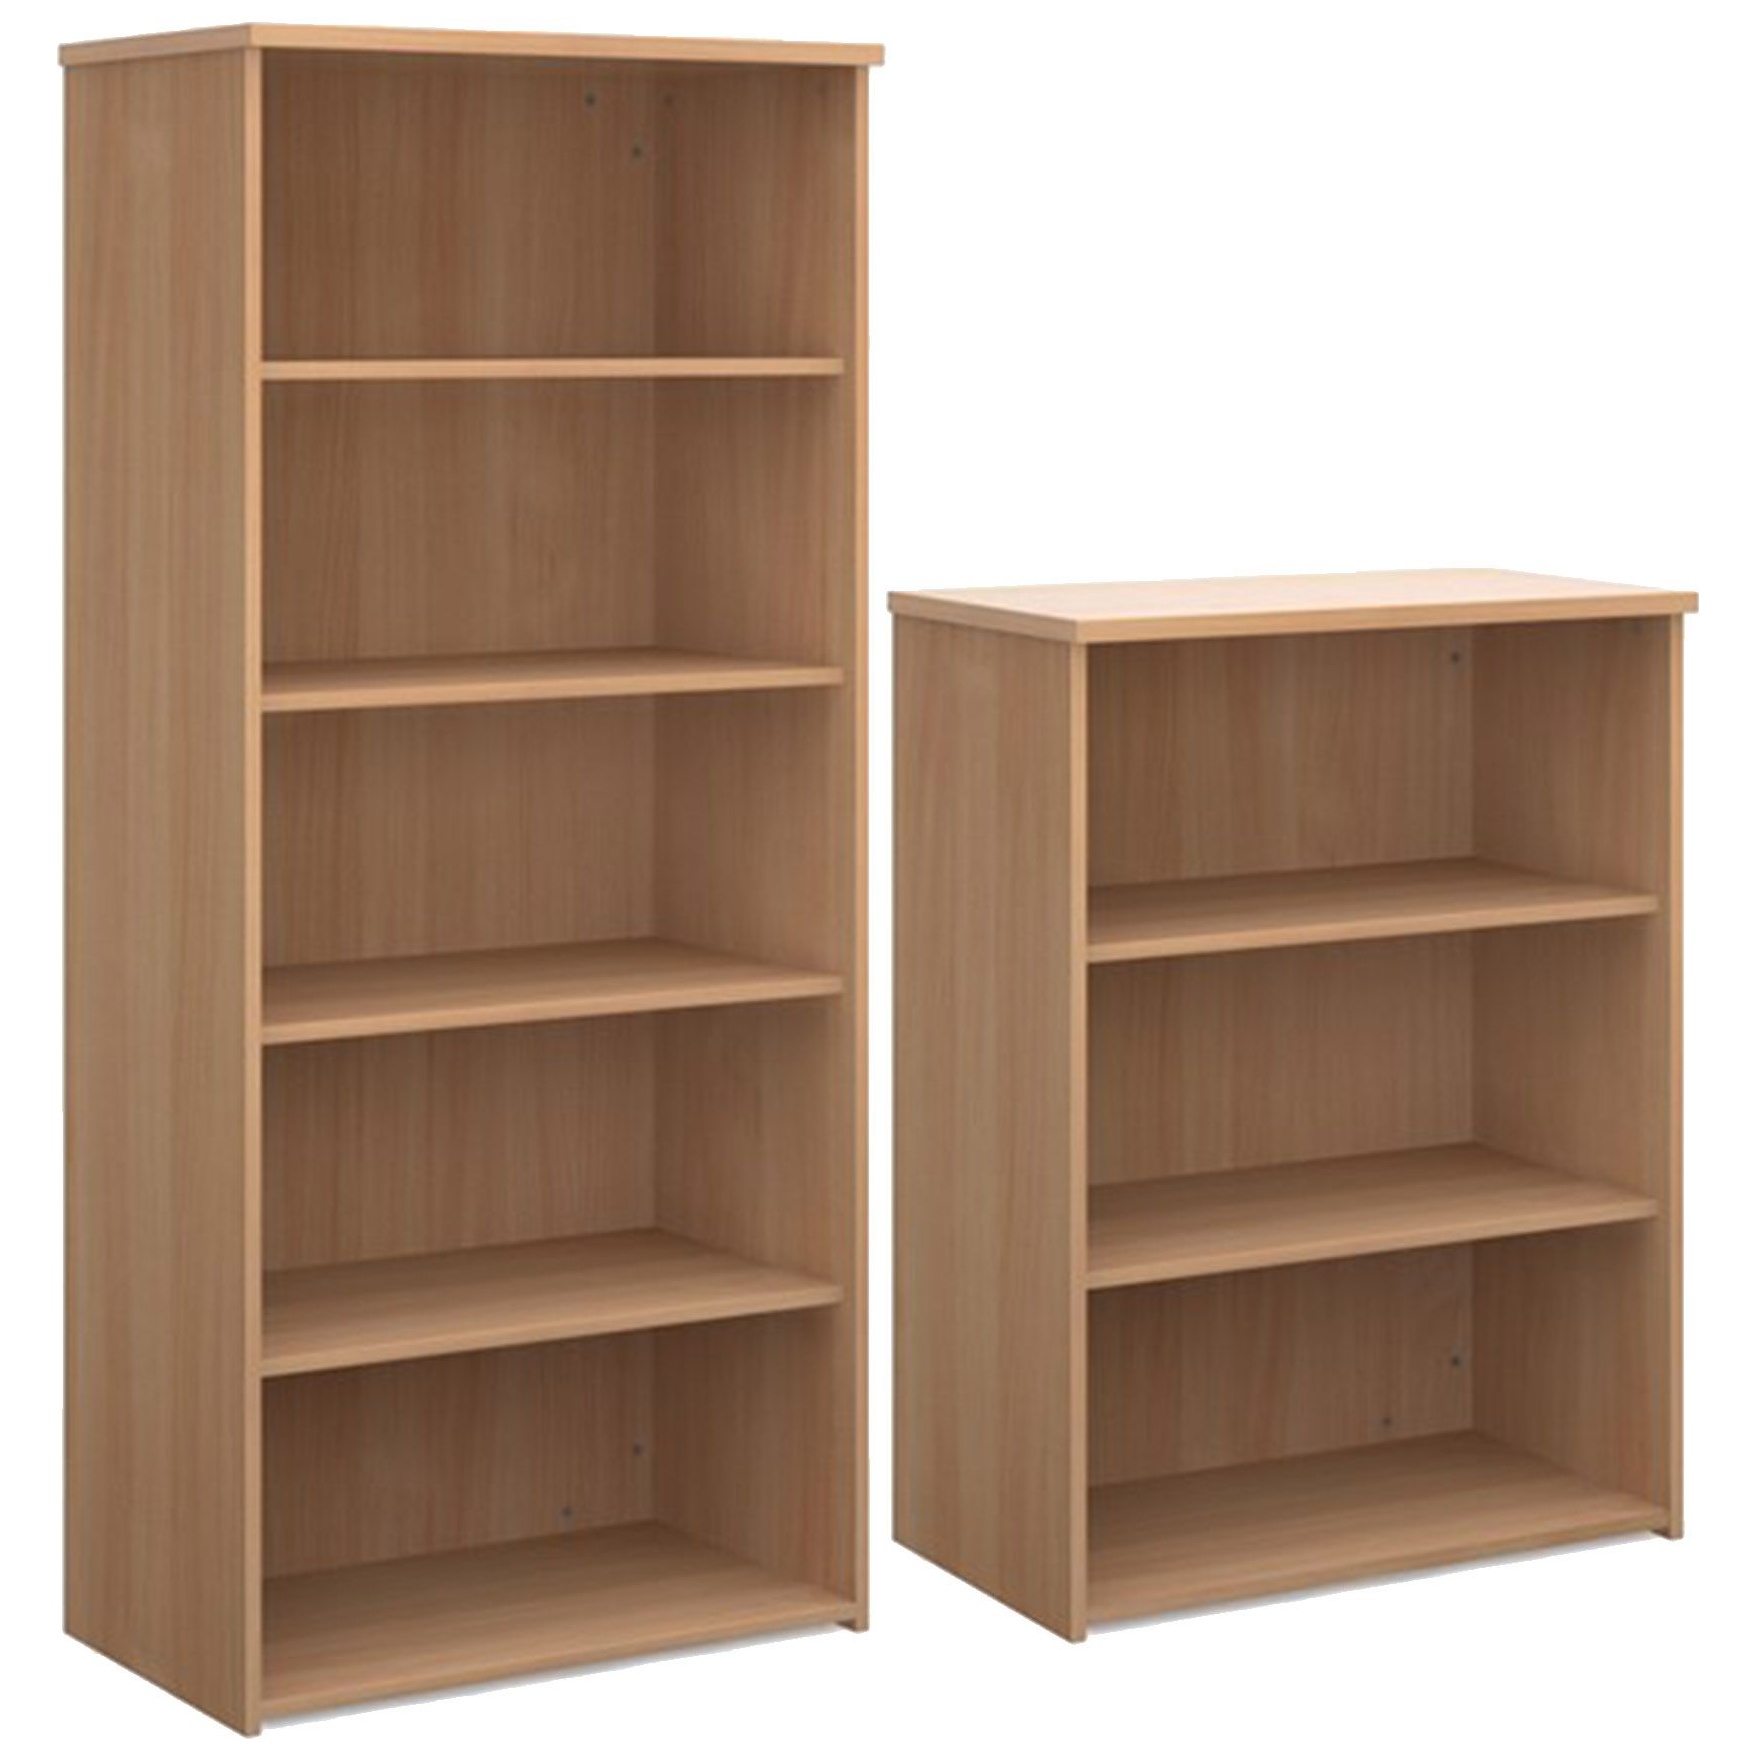 Everyday Large Volume Wooden Bookcases, Wooden Book Case Uk